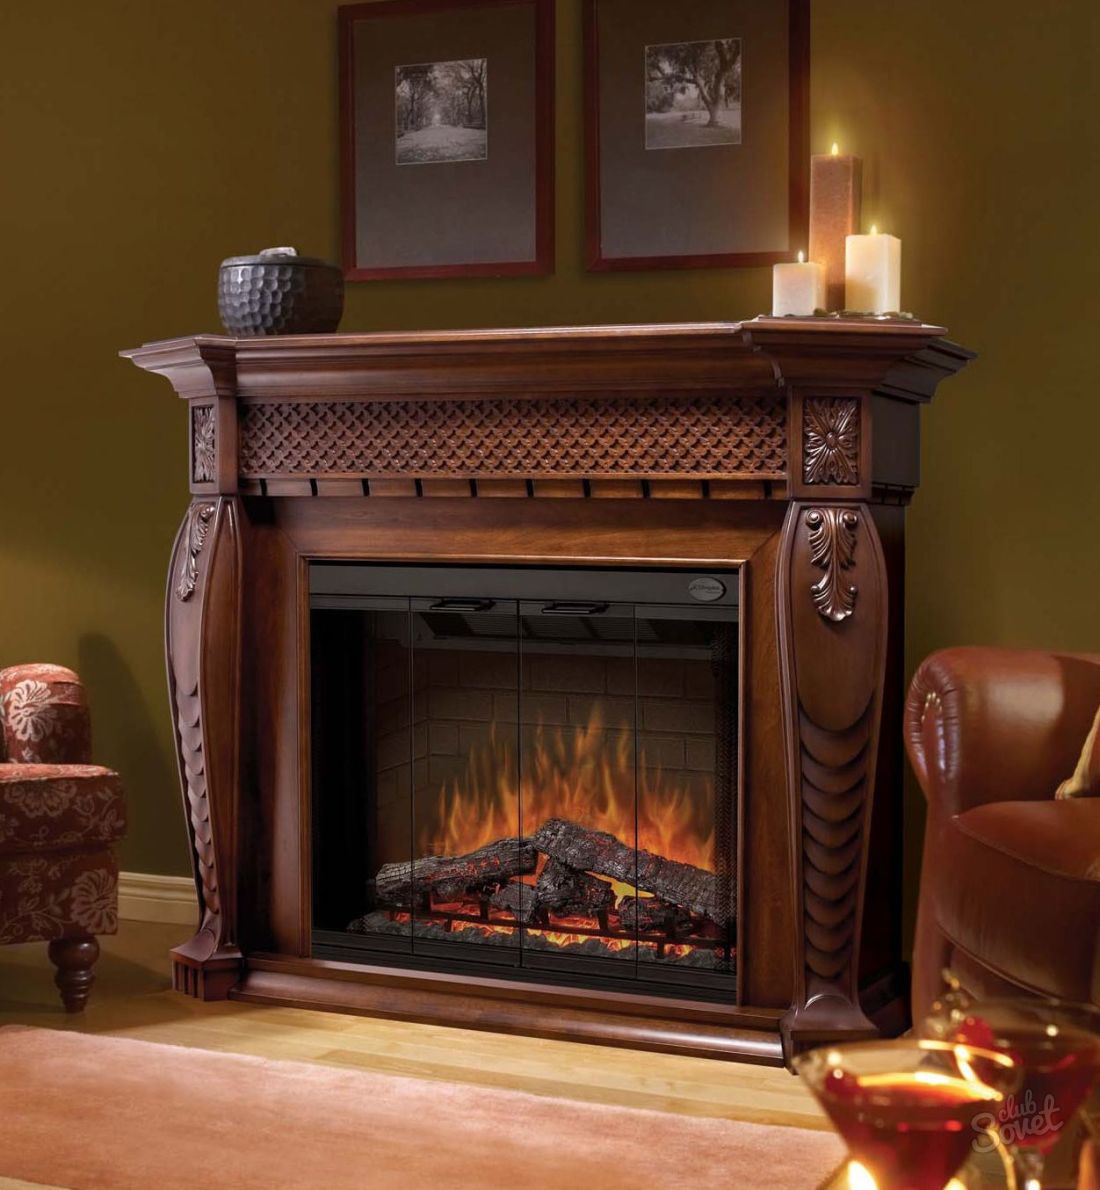 How to install an electric fireplace